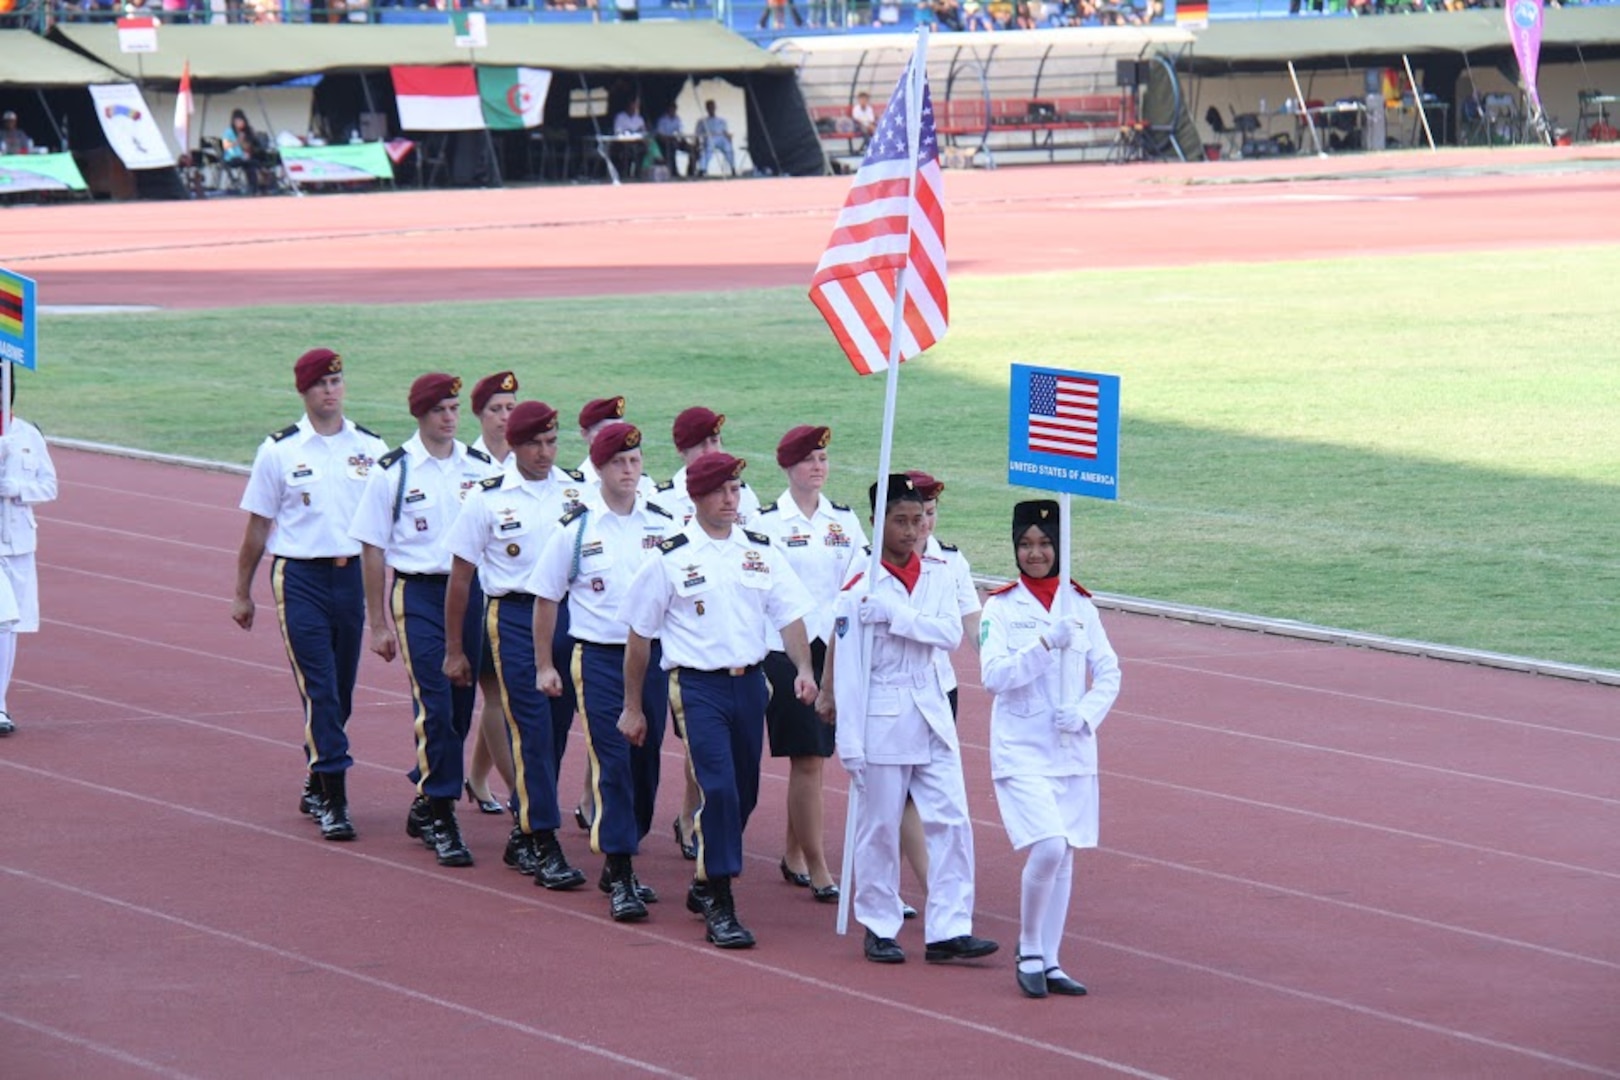 Team USA marching in during the opening ceremony of the 38th Conseil International du Sport Militaire (CISM) in Solo, Indonesia 17-28 September